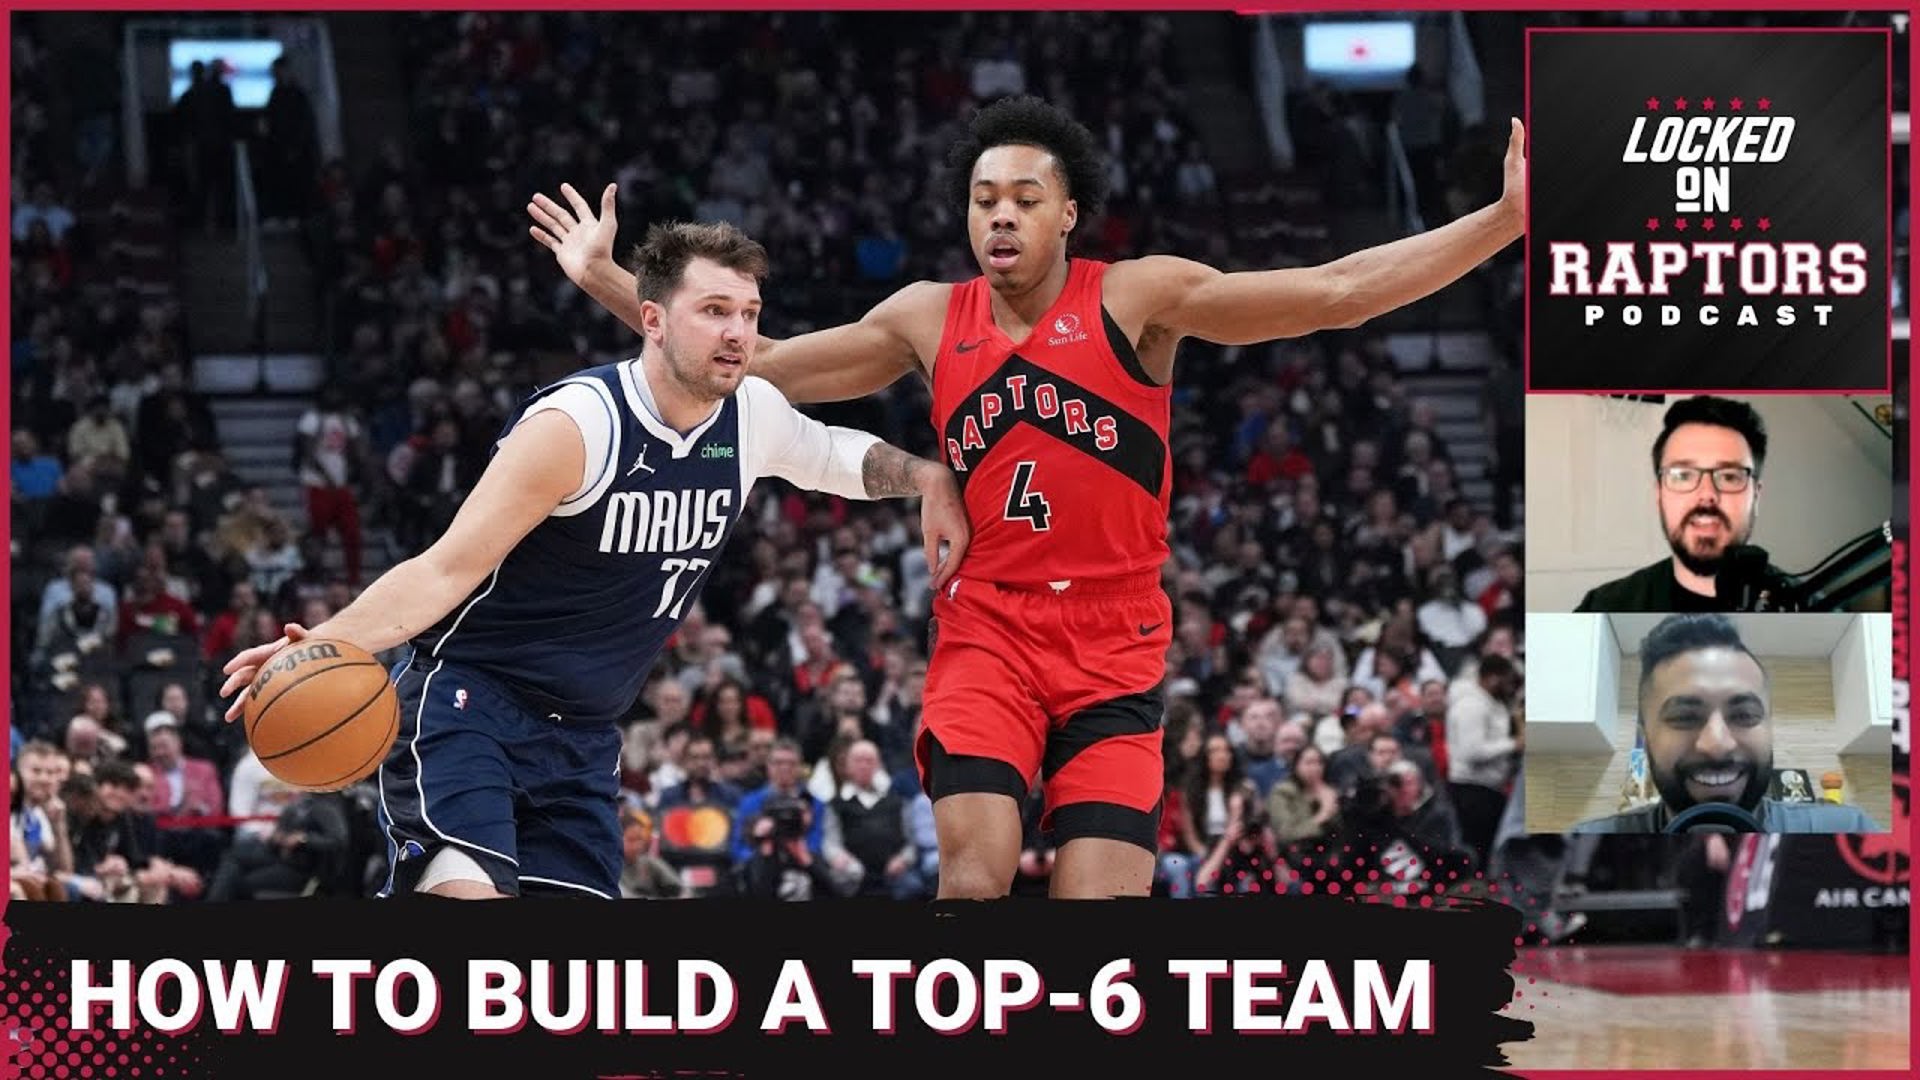 In Episode 1625, Sean Woodley is joined by Vivek Jacob (Sportsnet, Raptors in 7) to chat about the Toronto Raptors and how they can get back to the postseason